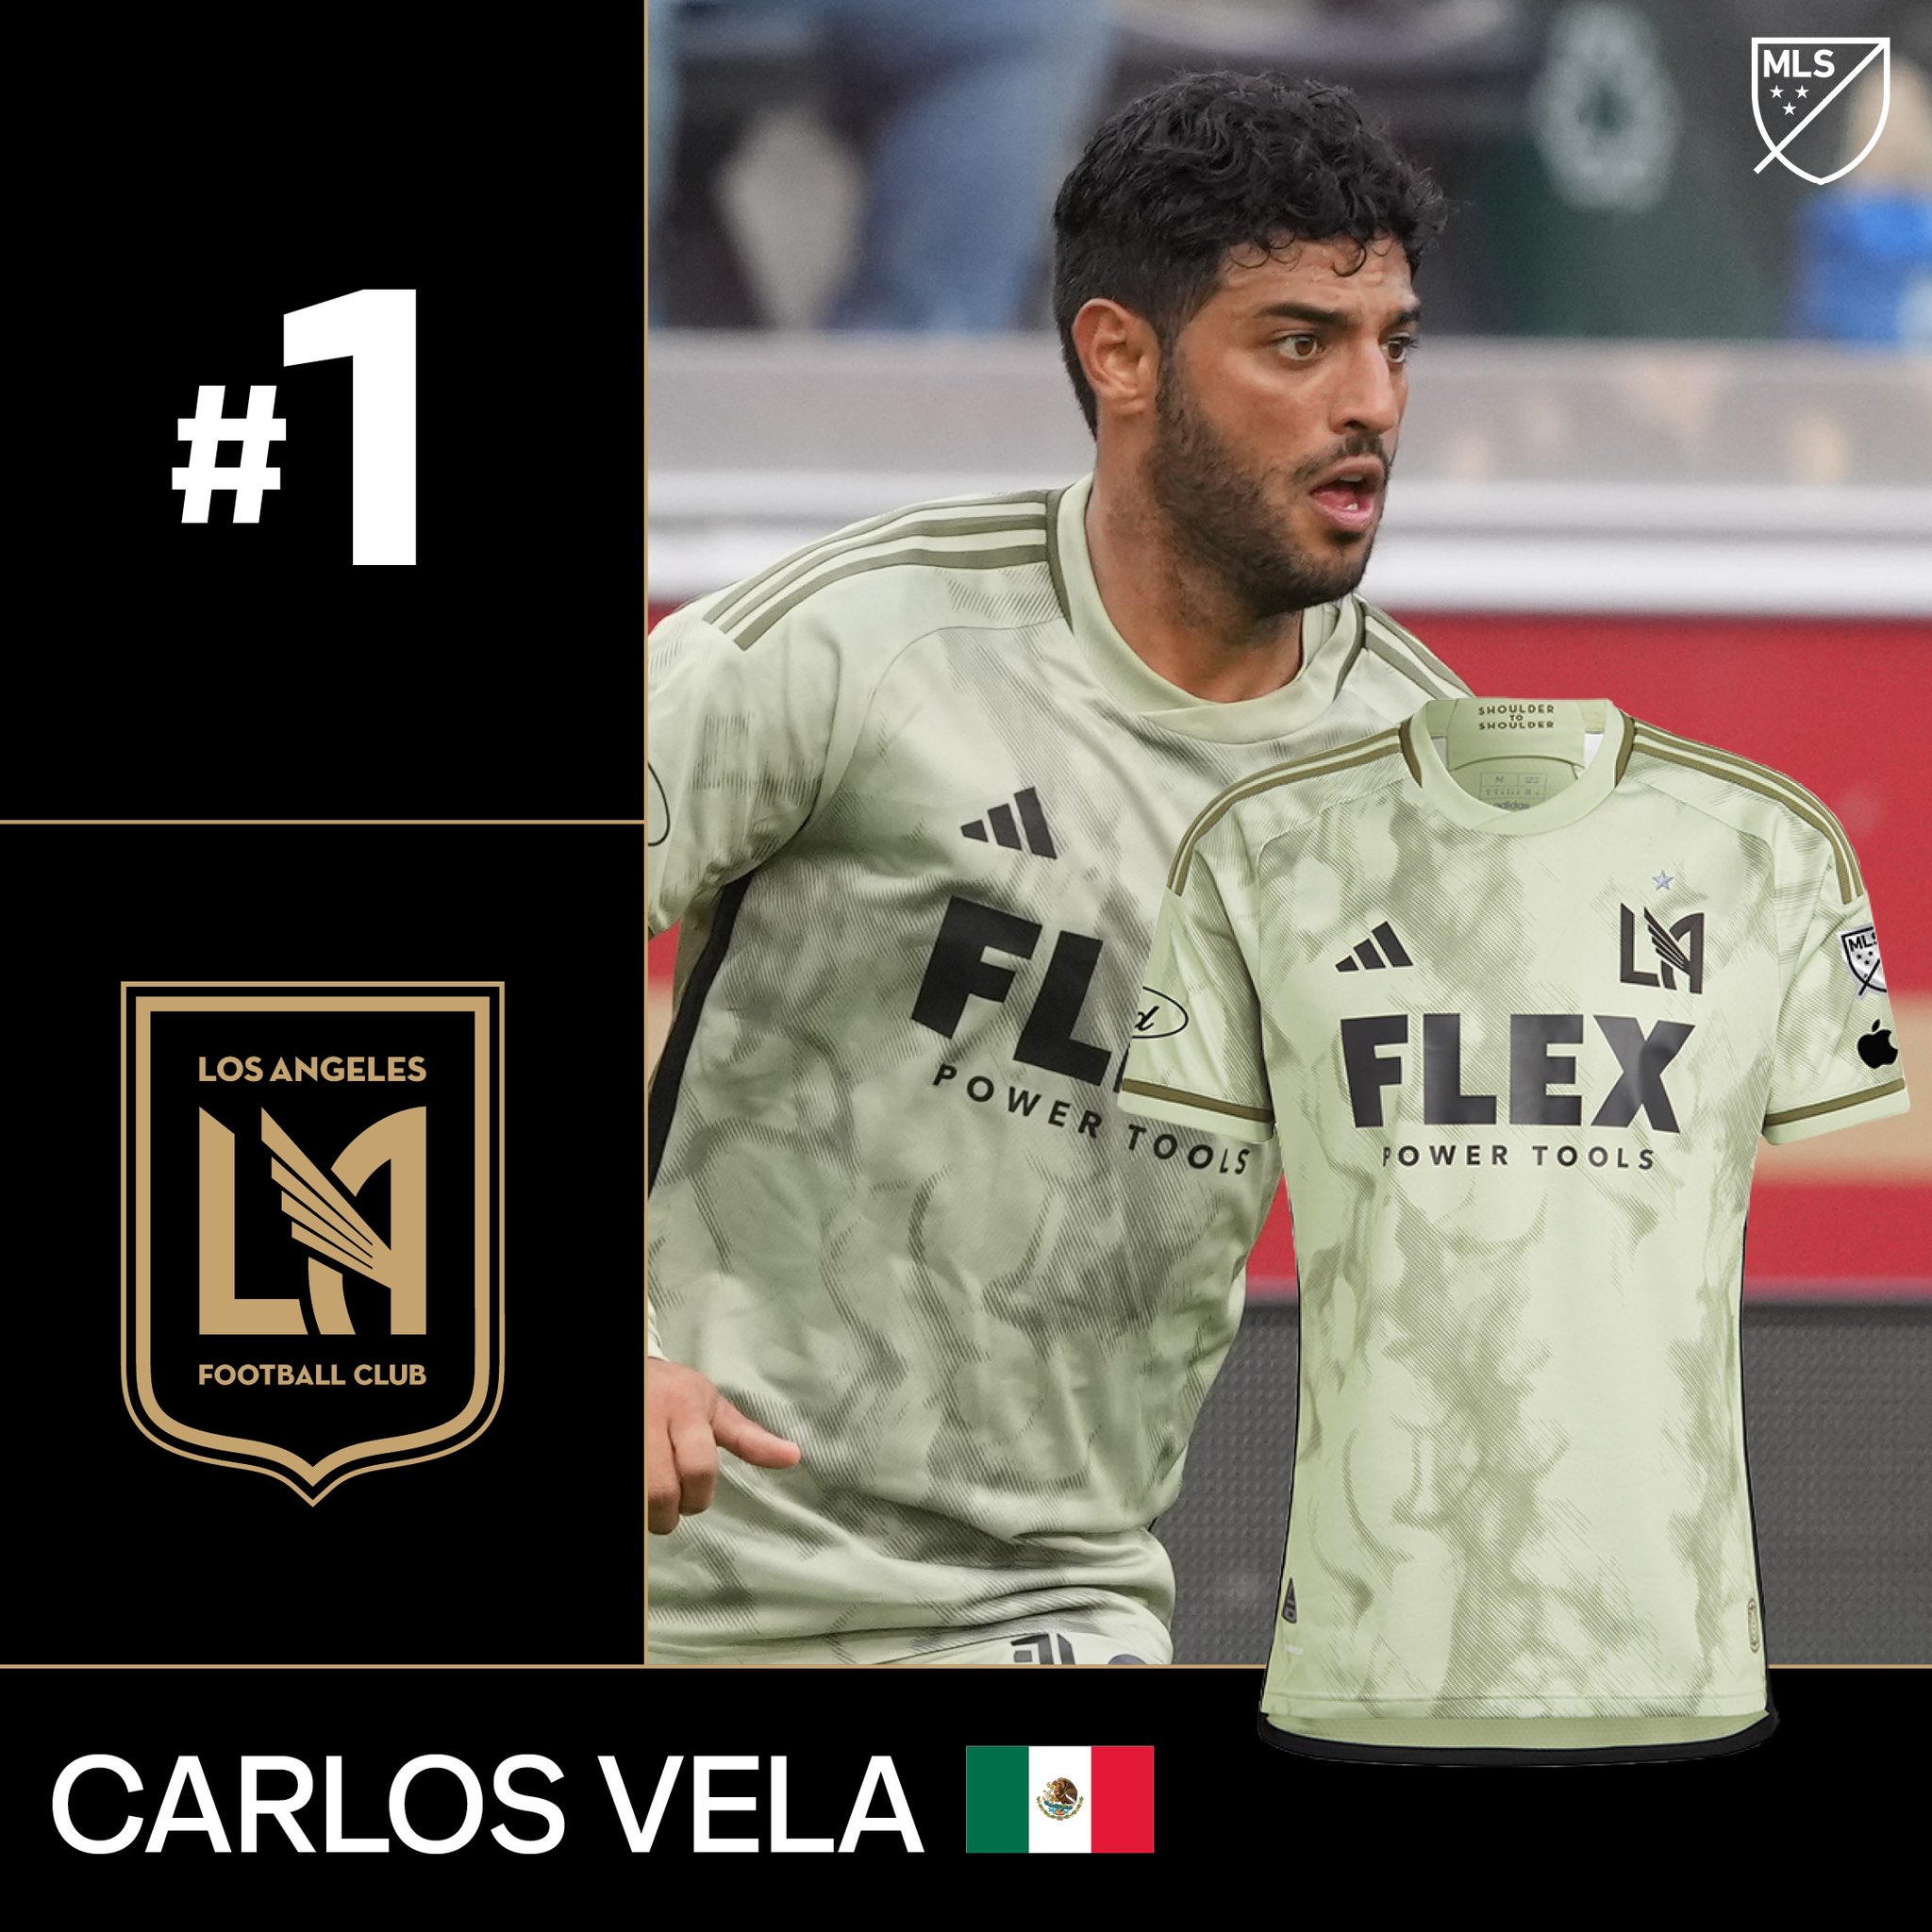 Our Esquina on X: Mexican superstar Carlos Vela's @LAFC jersey is the top  selling #MLS jersey. Mexican national team's all-time leading scorer  Chicharito Hernandez's @LAGalaxy jersey is the 4th most popular. @11carlosV